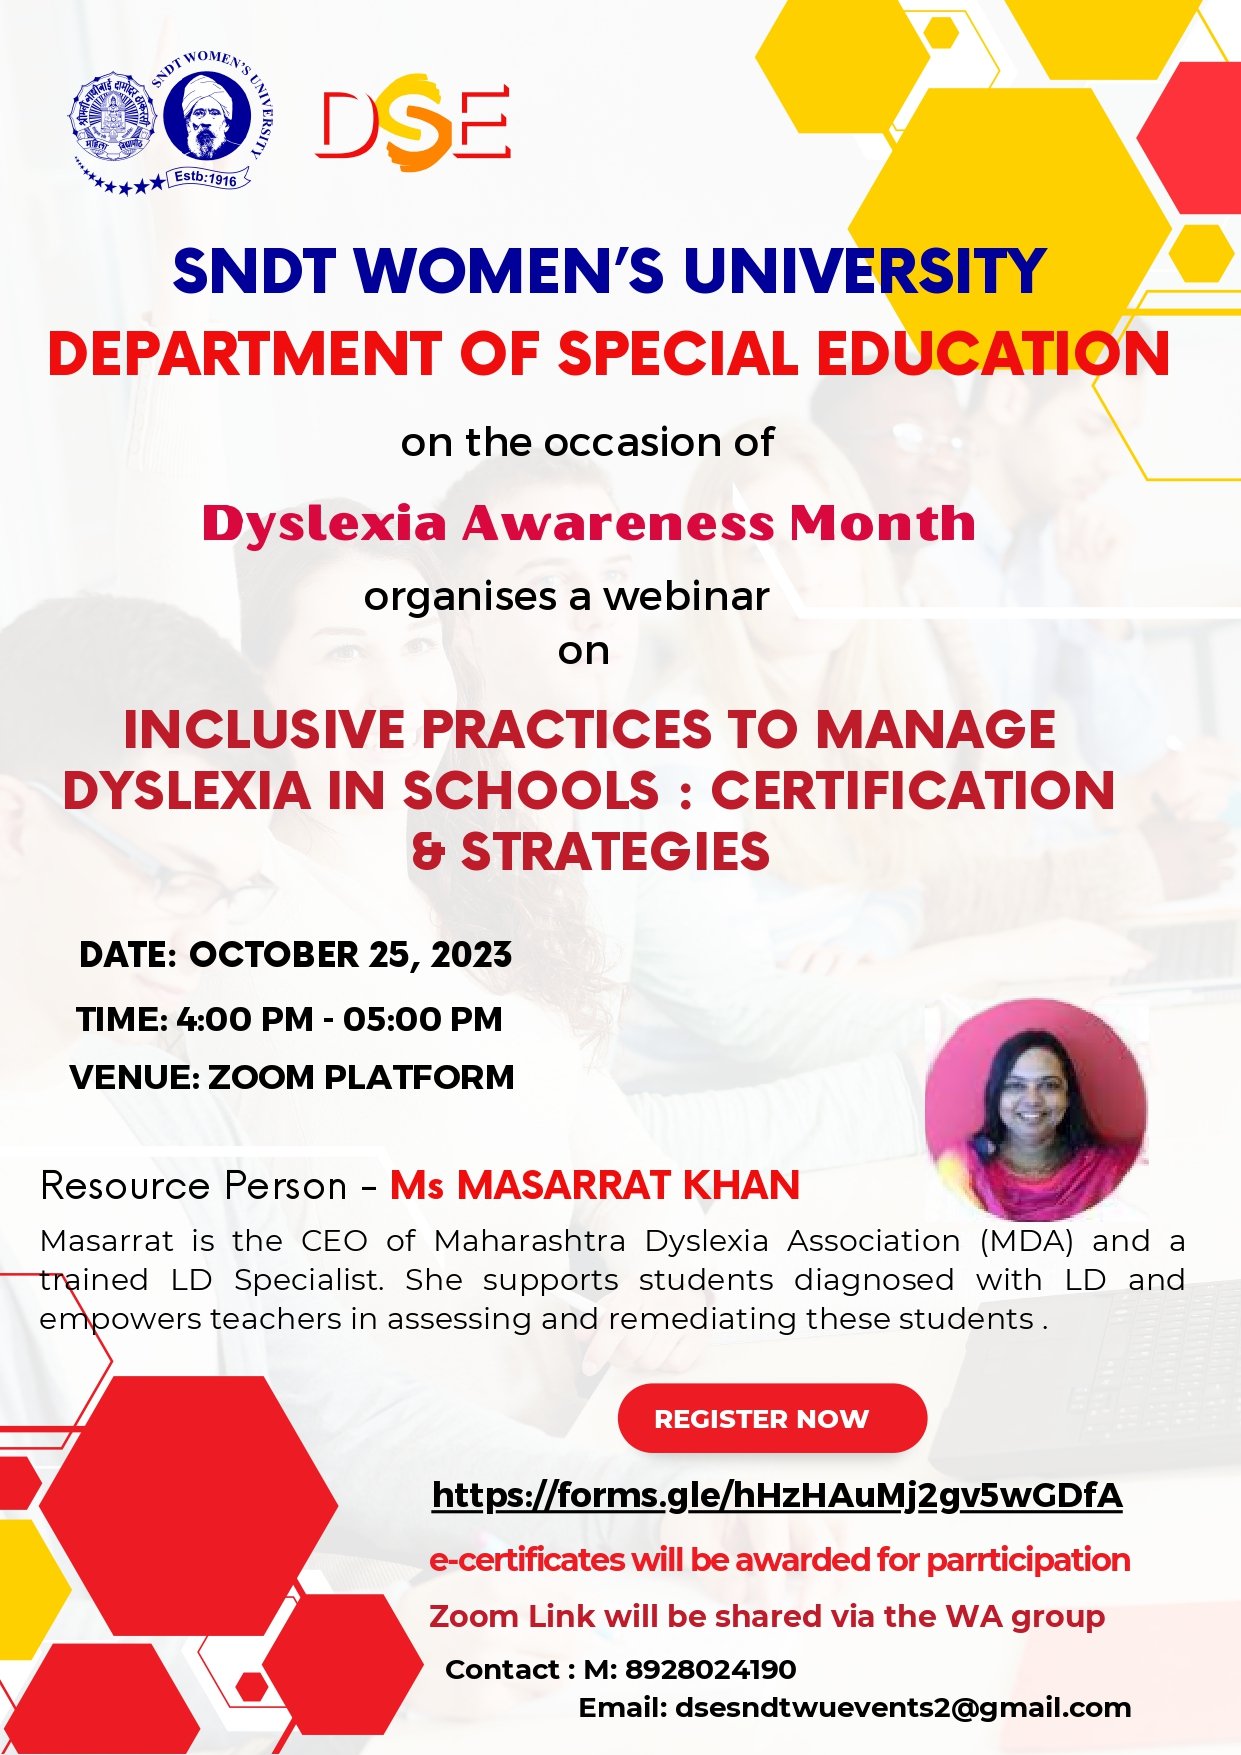 Webinar on Inclusive Practices to Manage Dyslexia in Schools : Certification & Strategies by Ms Masarrat Khan on occasion of World Dyslexia Awareness Month